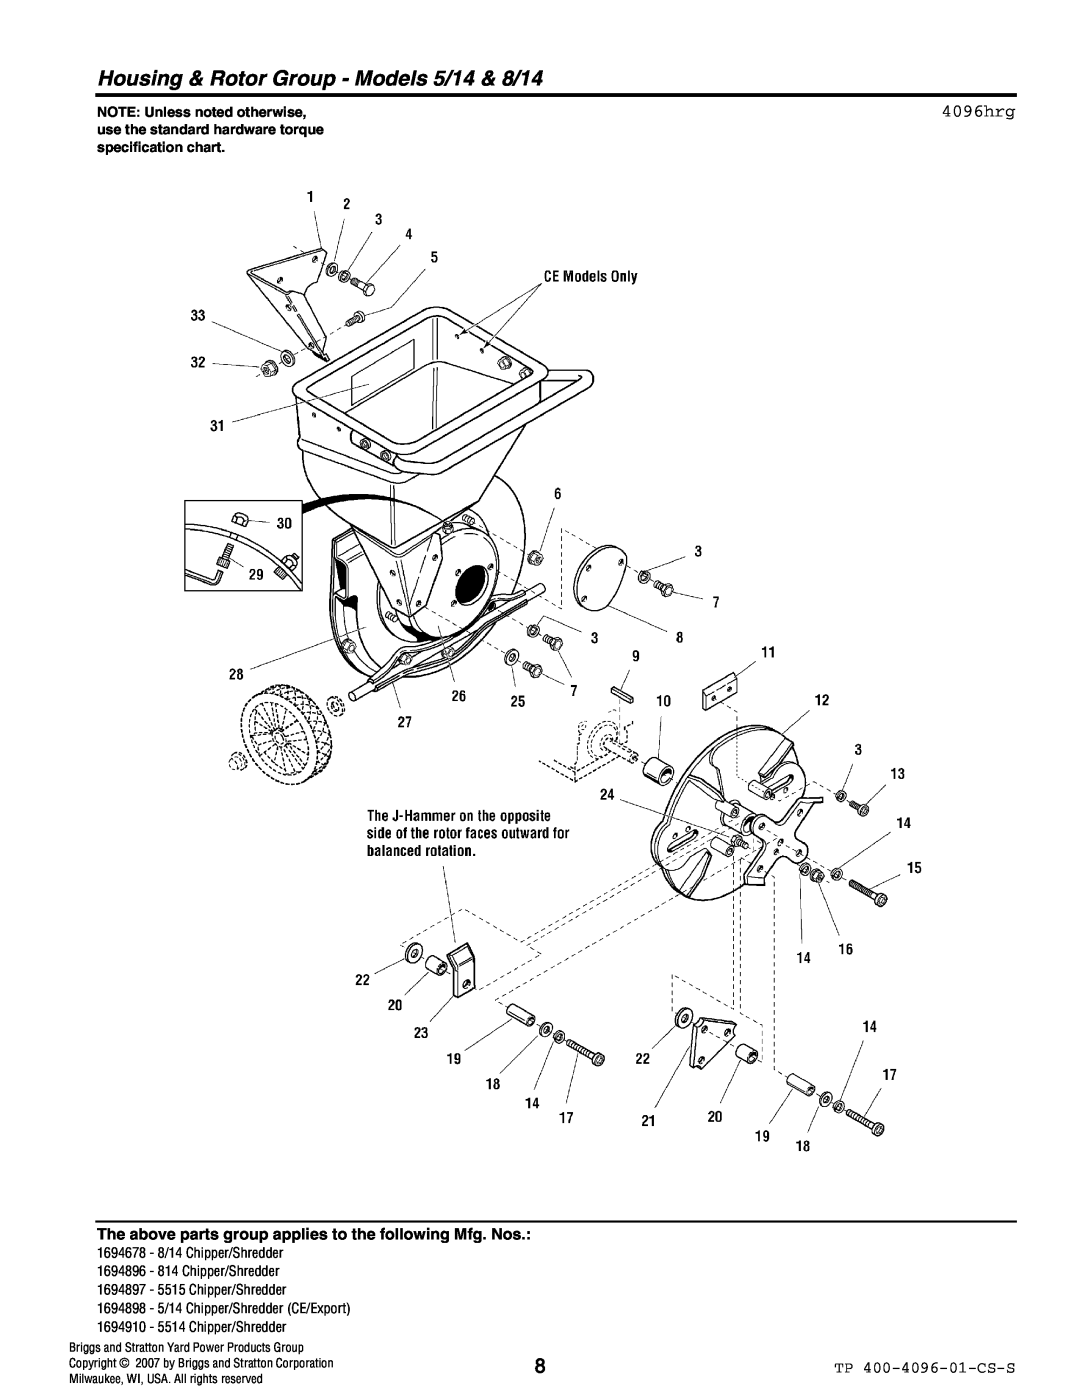 Simplicity 8/14 Series, 5/14 Series manual Housing & Rotor Group - Models 5/14 & 8/14, 4096hrg, NOTE: Unless noted otherwise 